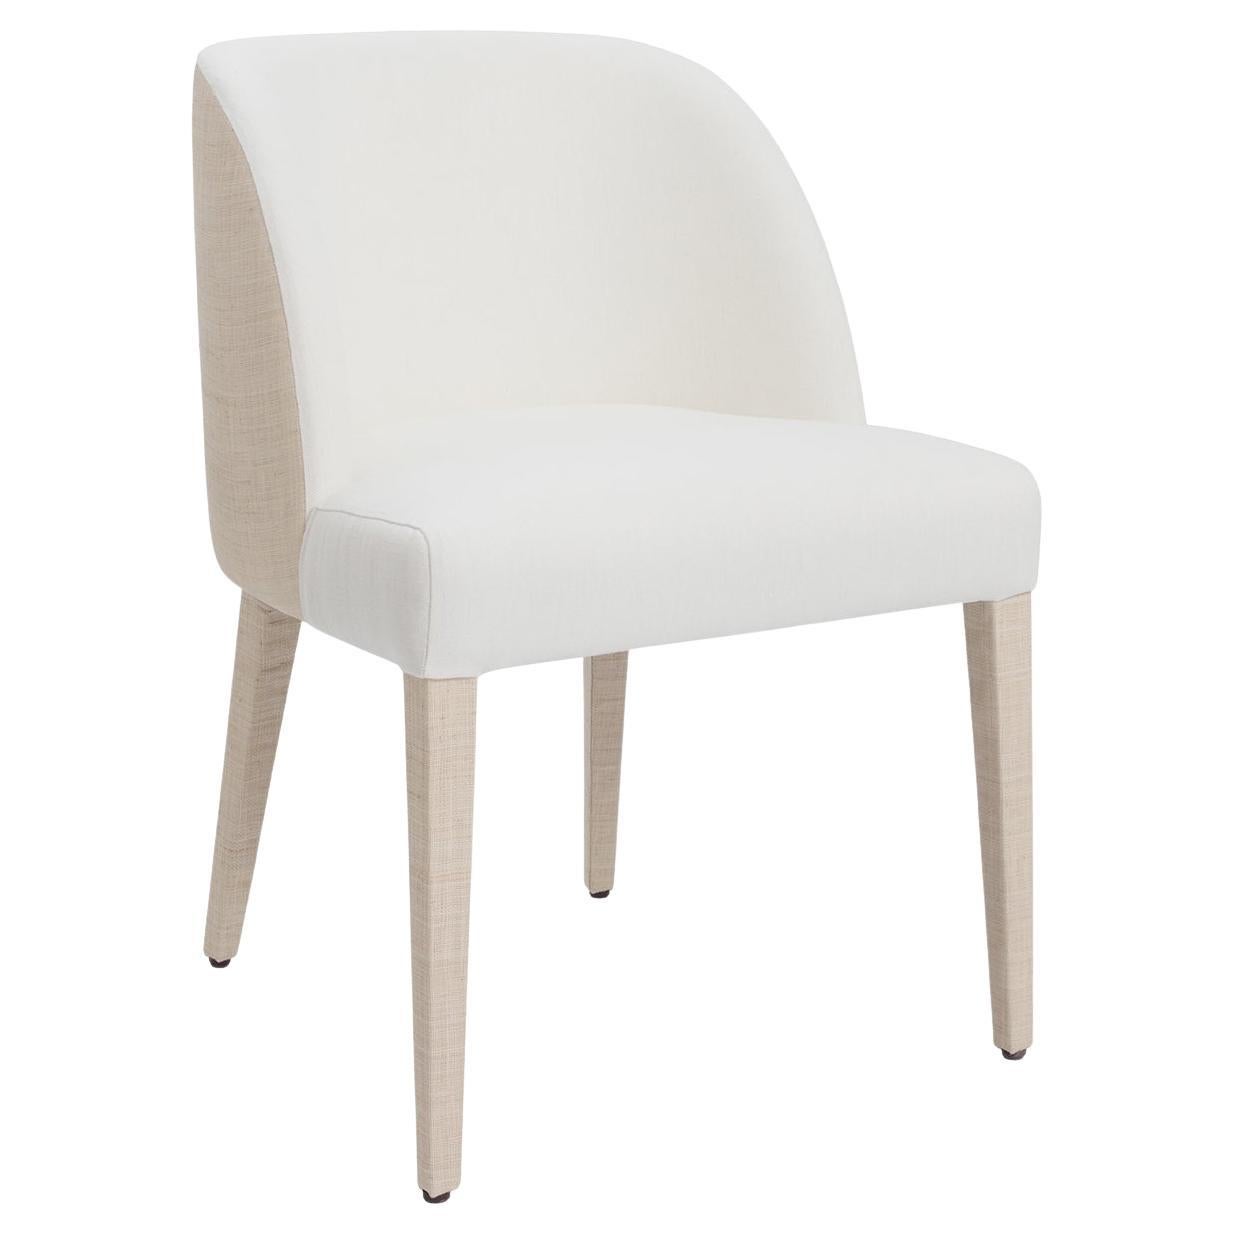 Colette Raffia Dining Chair For Sale